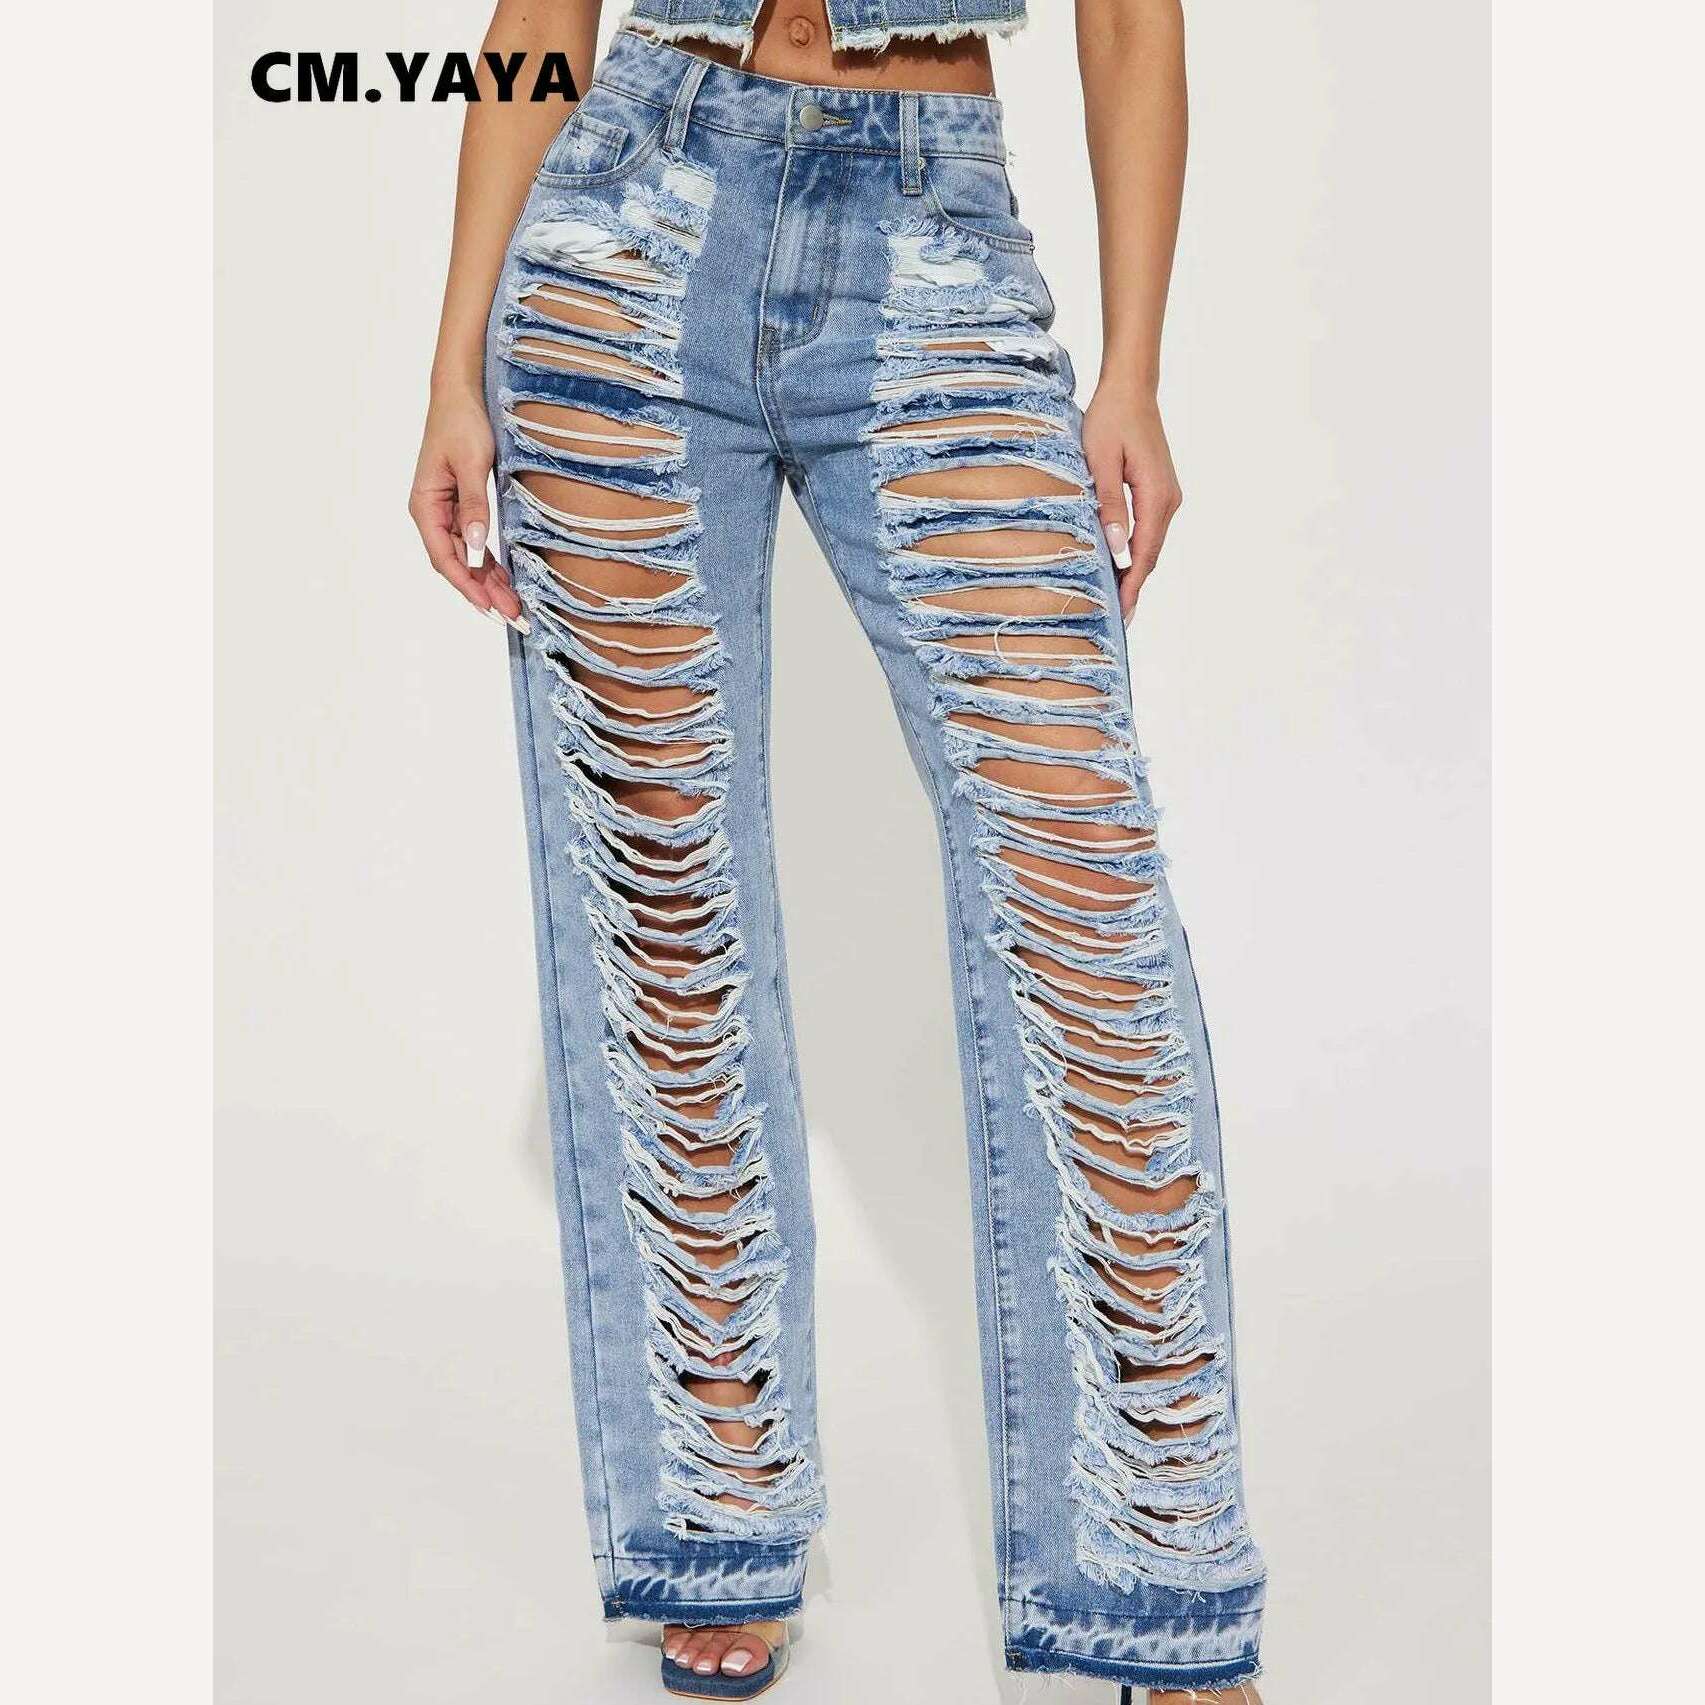 CM.YAYA Blue Denim Pants for Women 2023 Summer Streetwear Fashion Cutout Ripped Hollow Out Wide Leg Straight Jeans Trousers, KIMLUD Women's Clothes